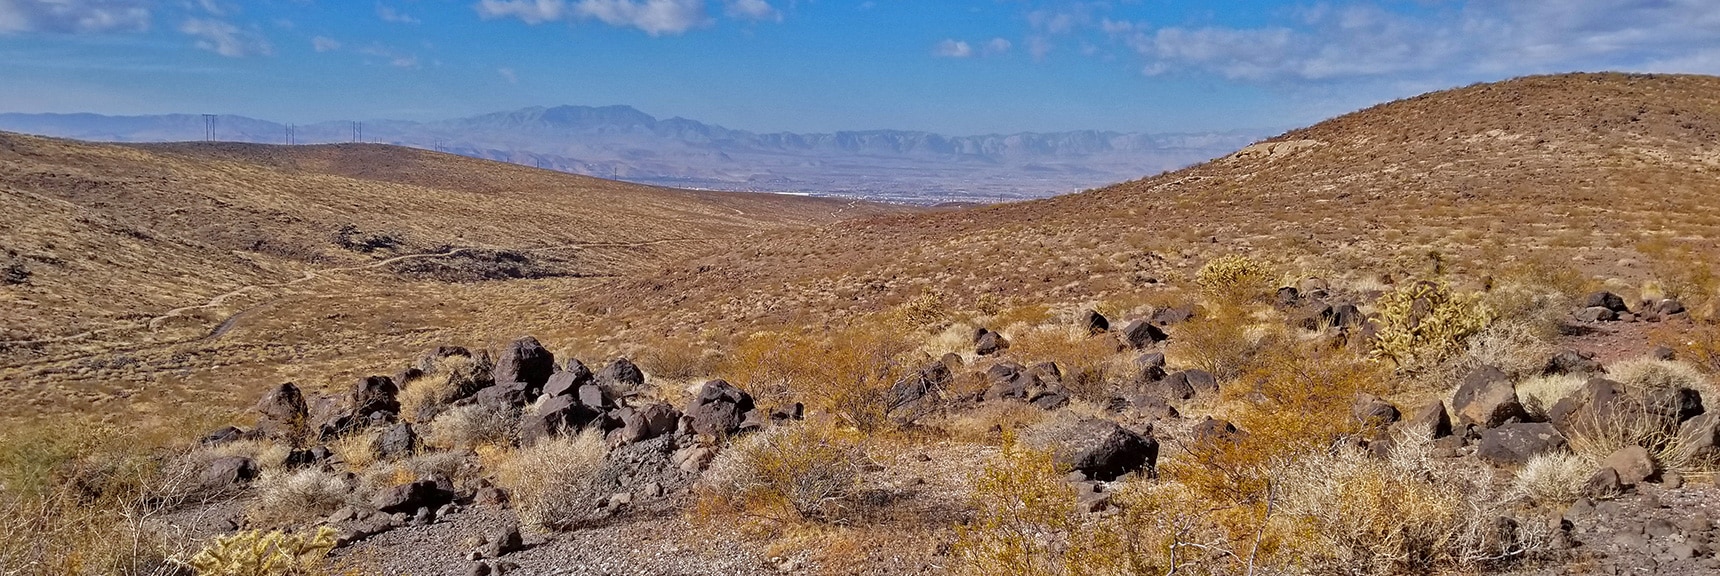 View Across Las Vegas Valley Toward Potosi Mt, Rainbow Mountains and Red Rock Park | McCullough Hills Trail in Sloan Canyon National Conservation Area, Nevada